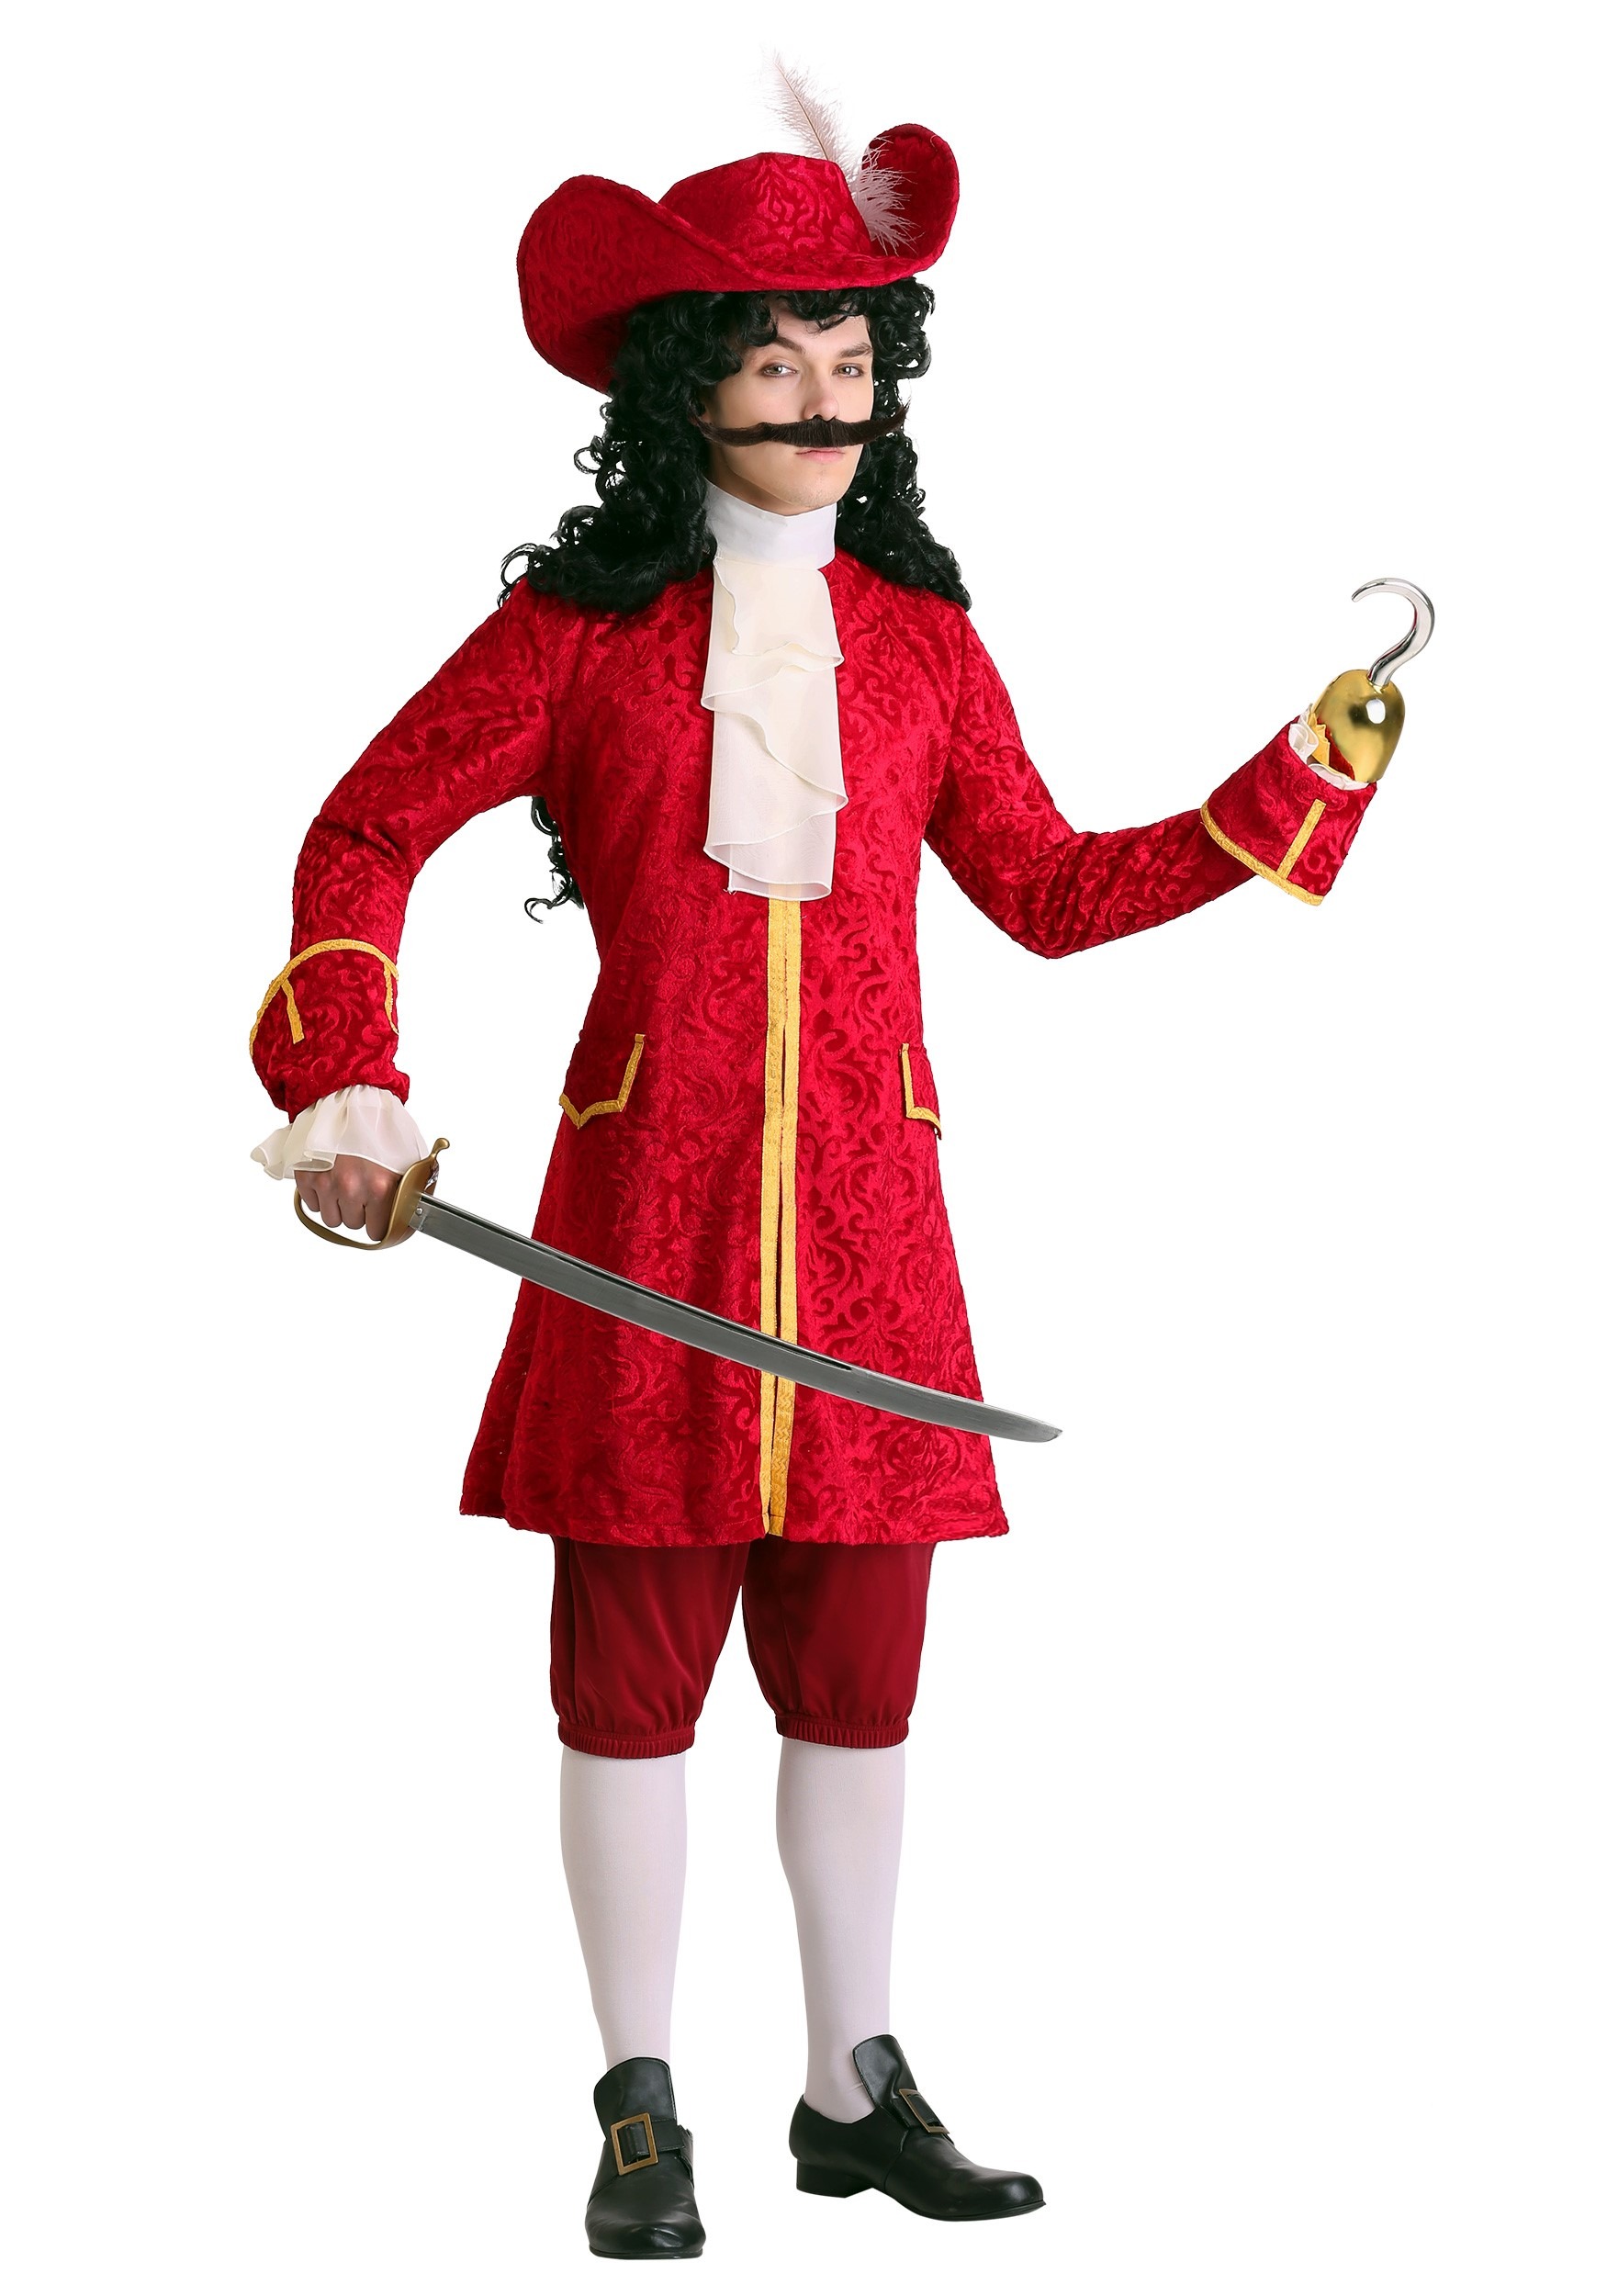 https://images.fun.co.uk/products/46198/1-1/plus-size-mens-captain-hook-costume.jpg